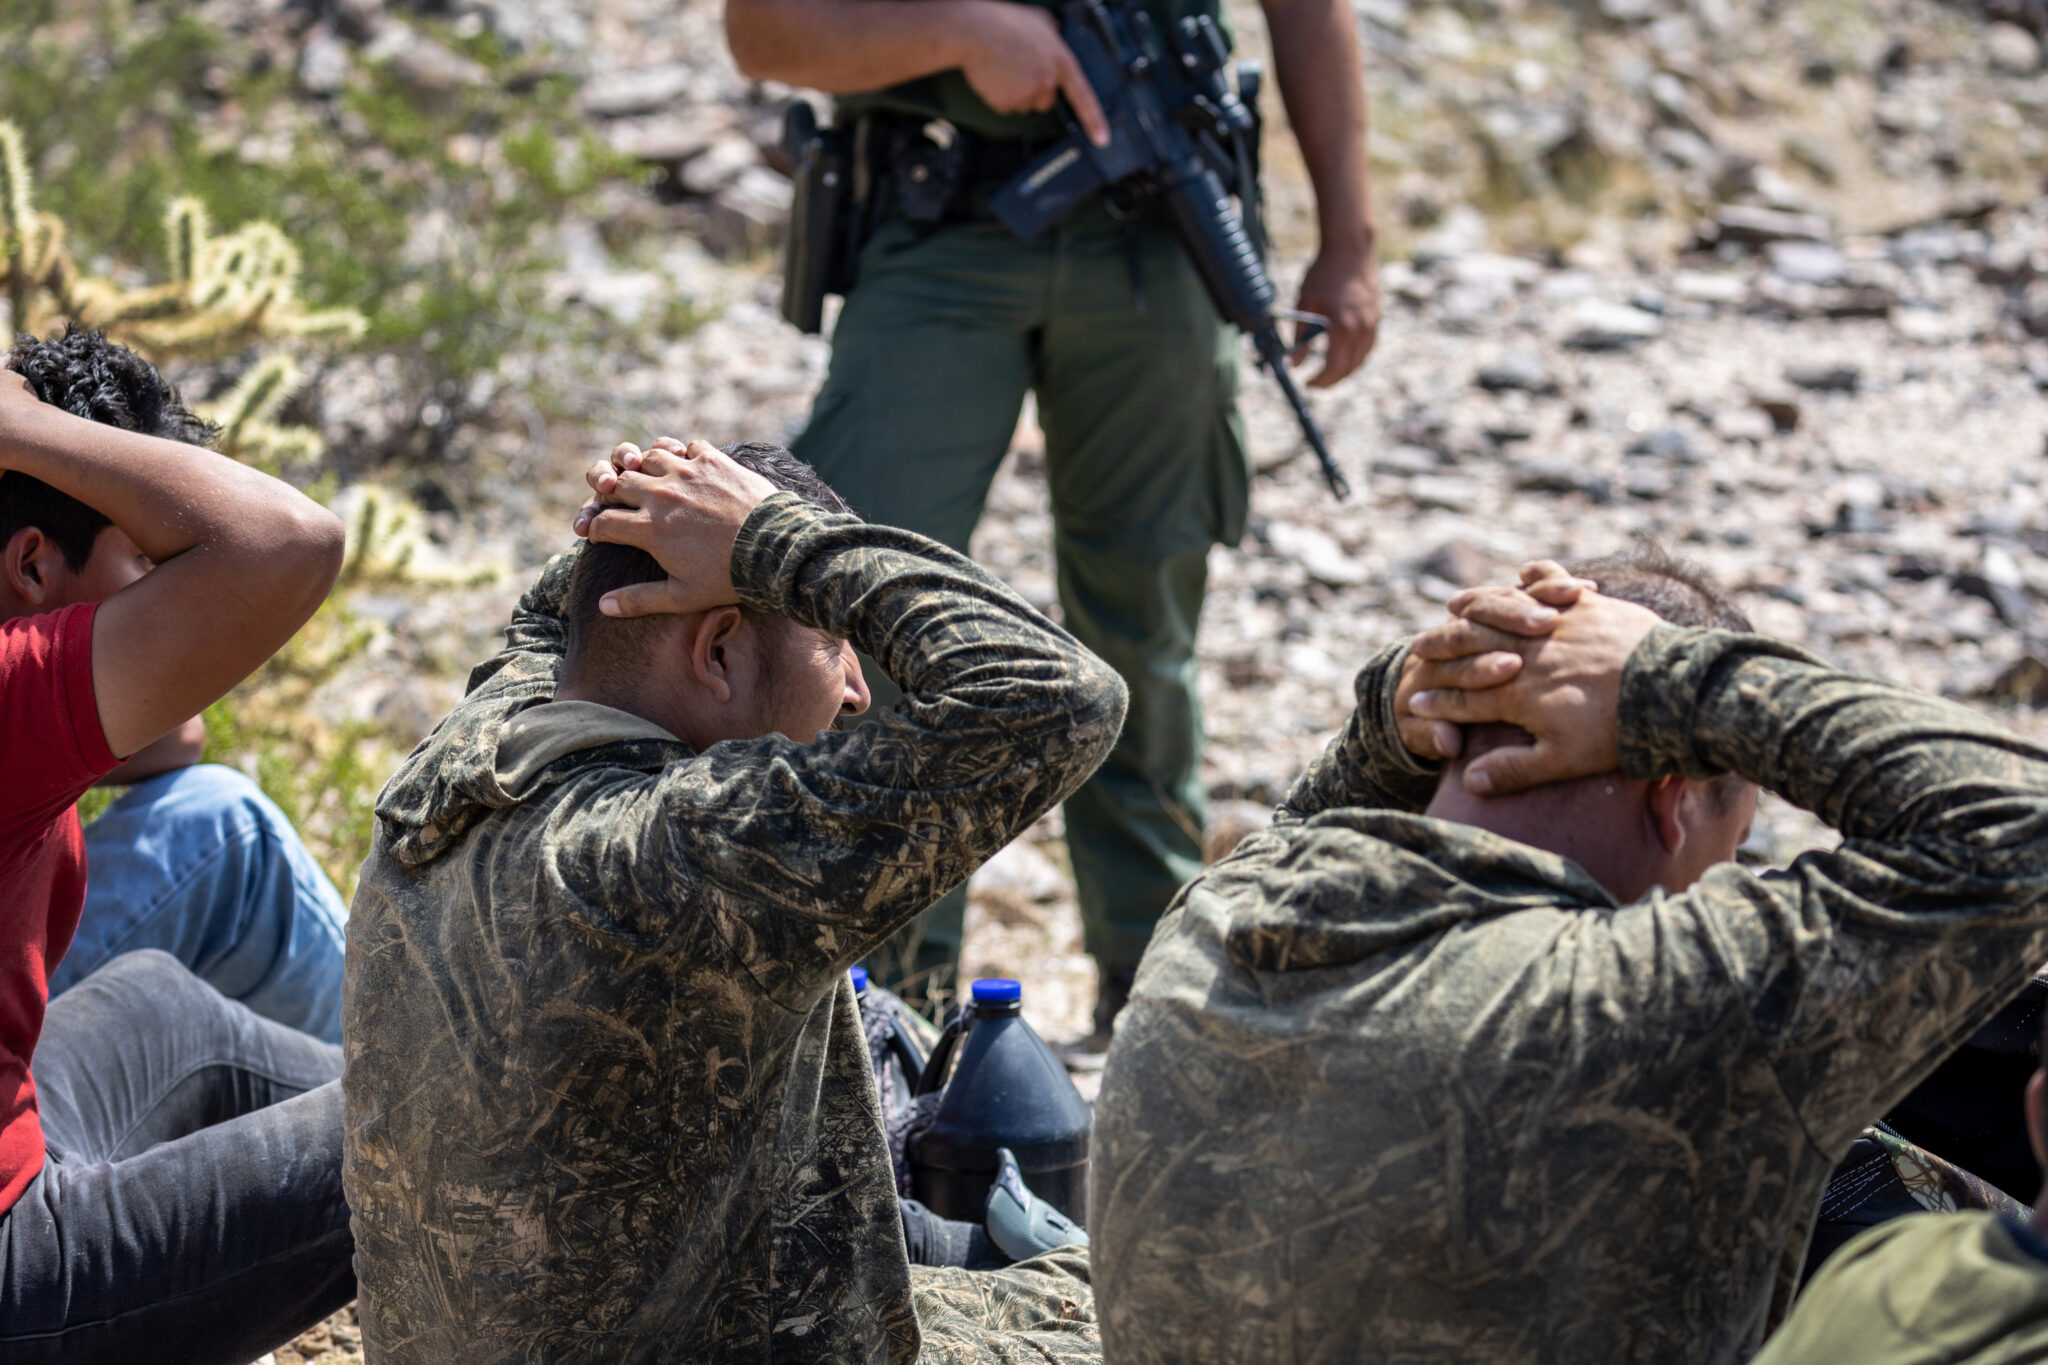 ORGAN PIPE NATIONAL MONUMENT, ARIZONA - SEPTEMBER 28: A U.S. Border Patrol agents guards a group of immigrants after tracking them through rugged terrain on September 28, 2022 at the Organ Pipe National Monument, Arizona. U.S. immigration authorities made more than 2 million arrests along the U.S. southern border during the 2022 fiscal year, which ends September 30, the first time to reach that historic threshold. (Photo by John Moore/Getty Images)